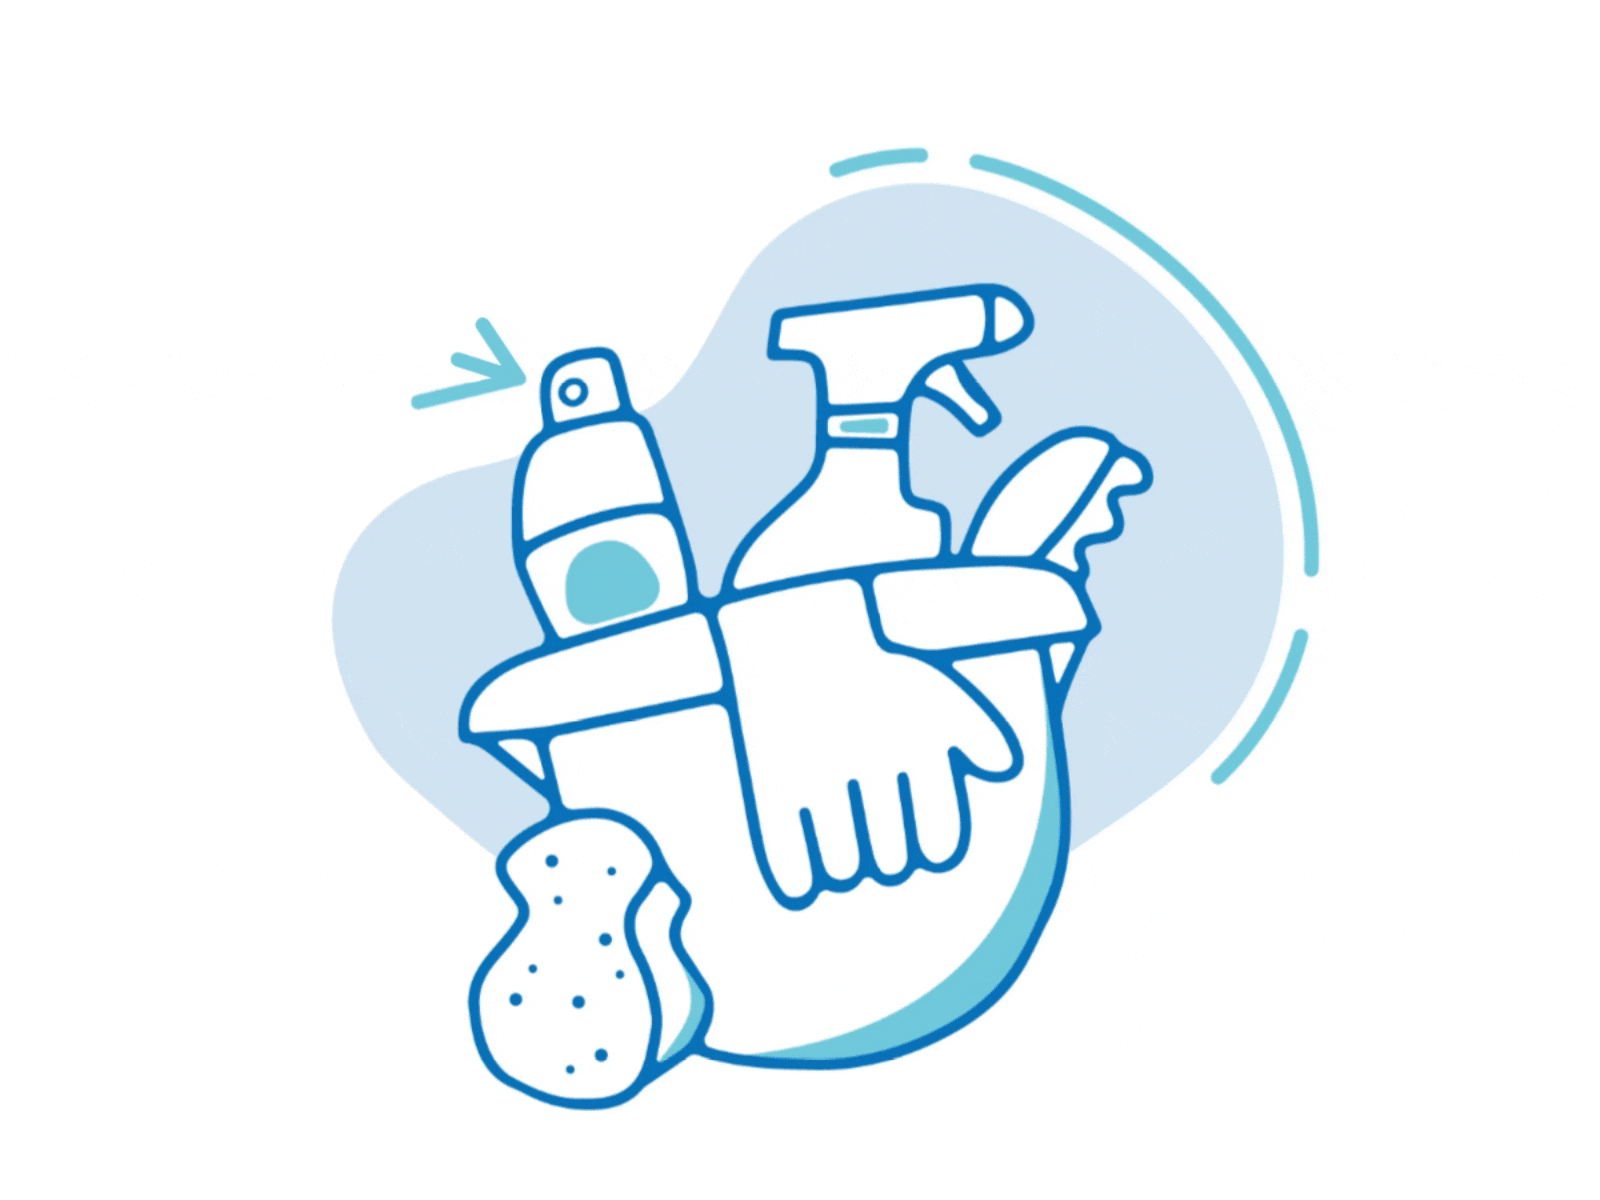 Spray Safe Out There animated gif cleaning cleaning supplies covid19 email marketing hand drawn handmade illustration illustrator procreate vector